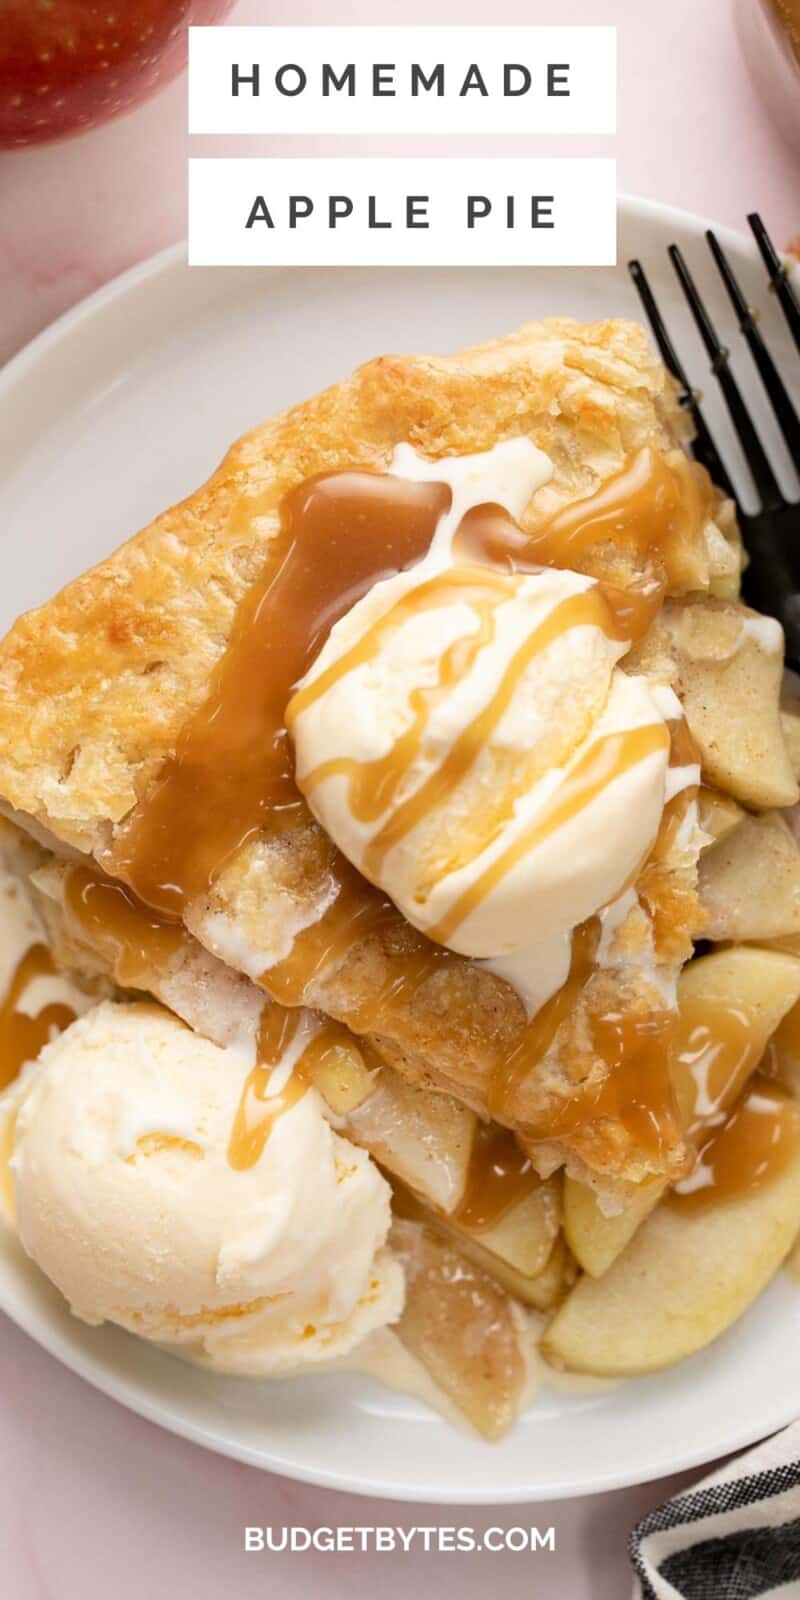 Overhead shot of a slice of apple pie on a white plate with two scoops of vanilla ice cream and drizzled with caramel sauce.